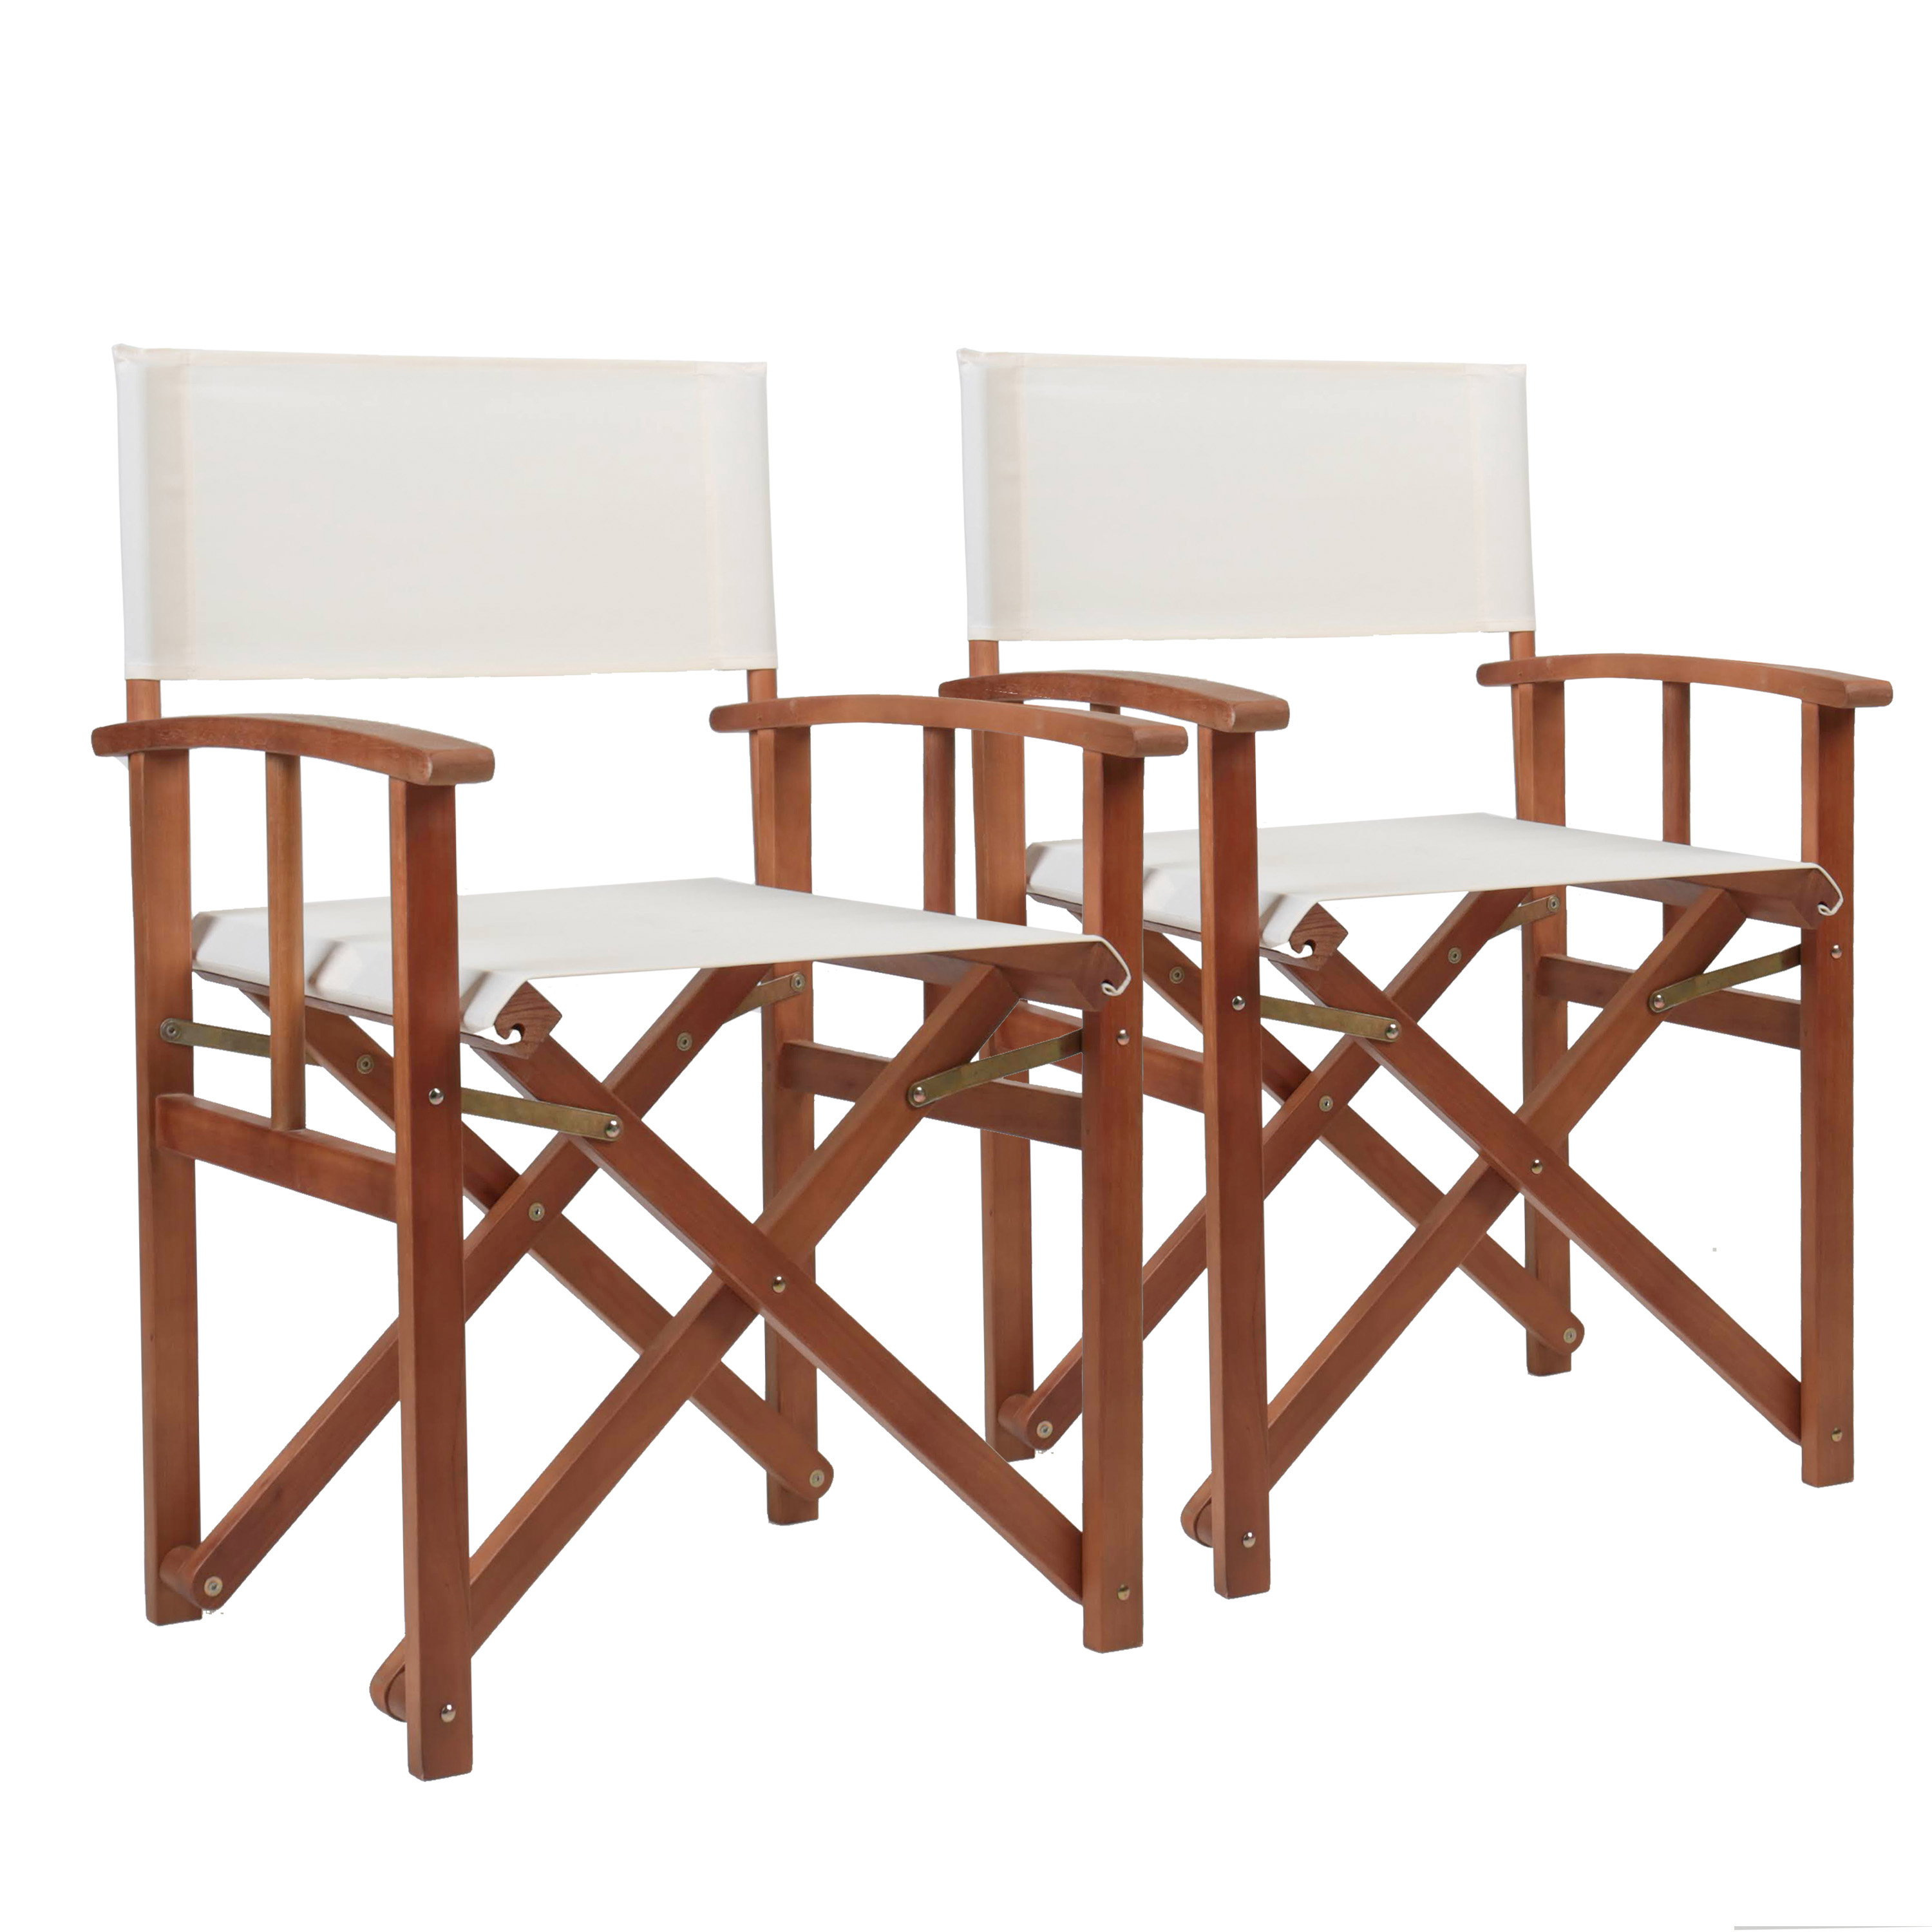 Charles Bentley Pair Of Folding Wooden, Folding Wood Director Chairs